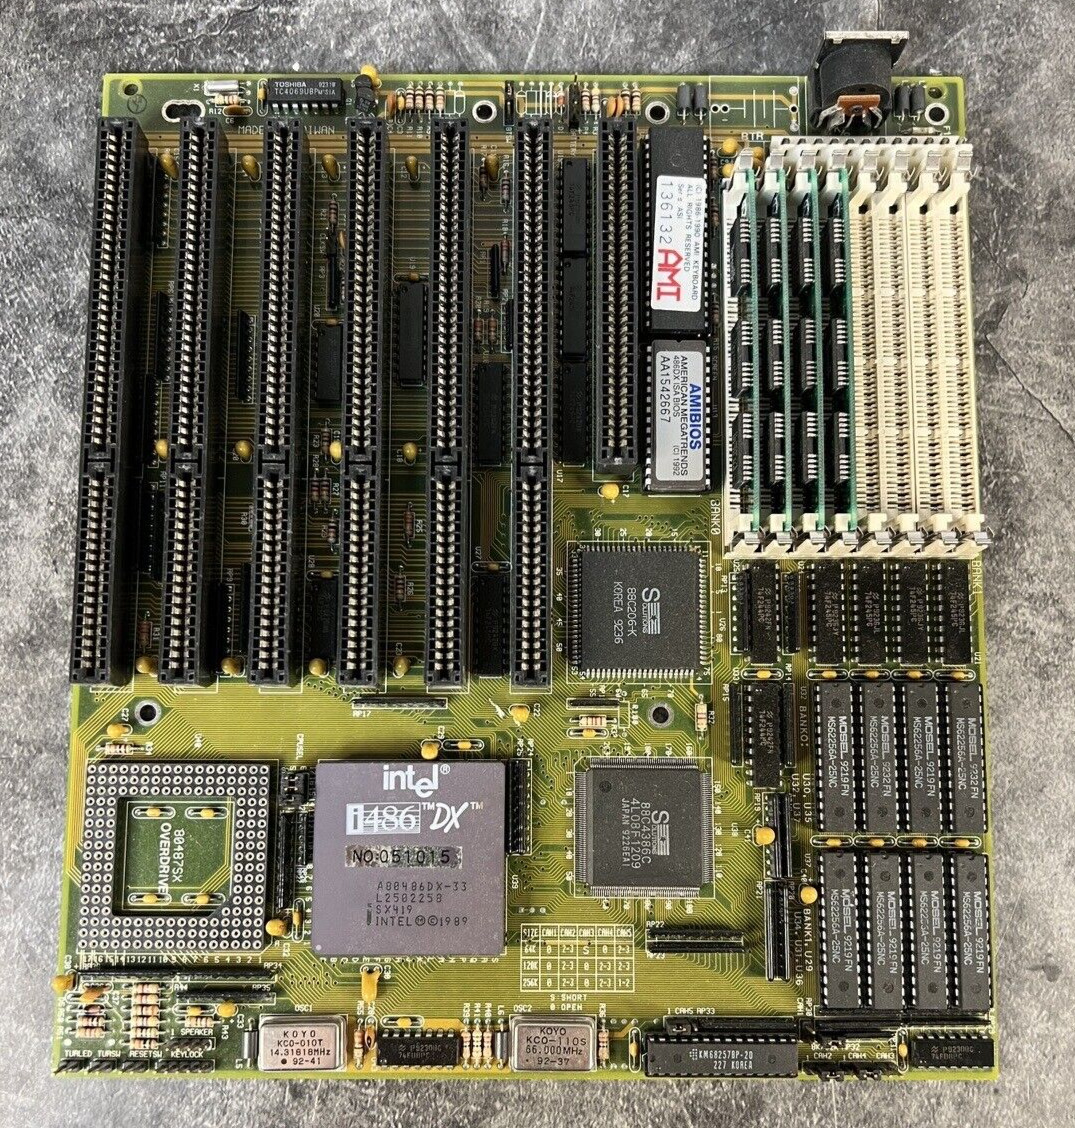 Vintage Motherboard Ambios 486DX Intel i486 DX2, 1990s - UNTESTED